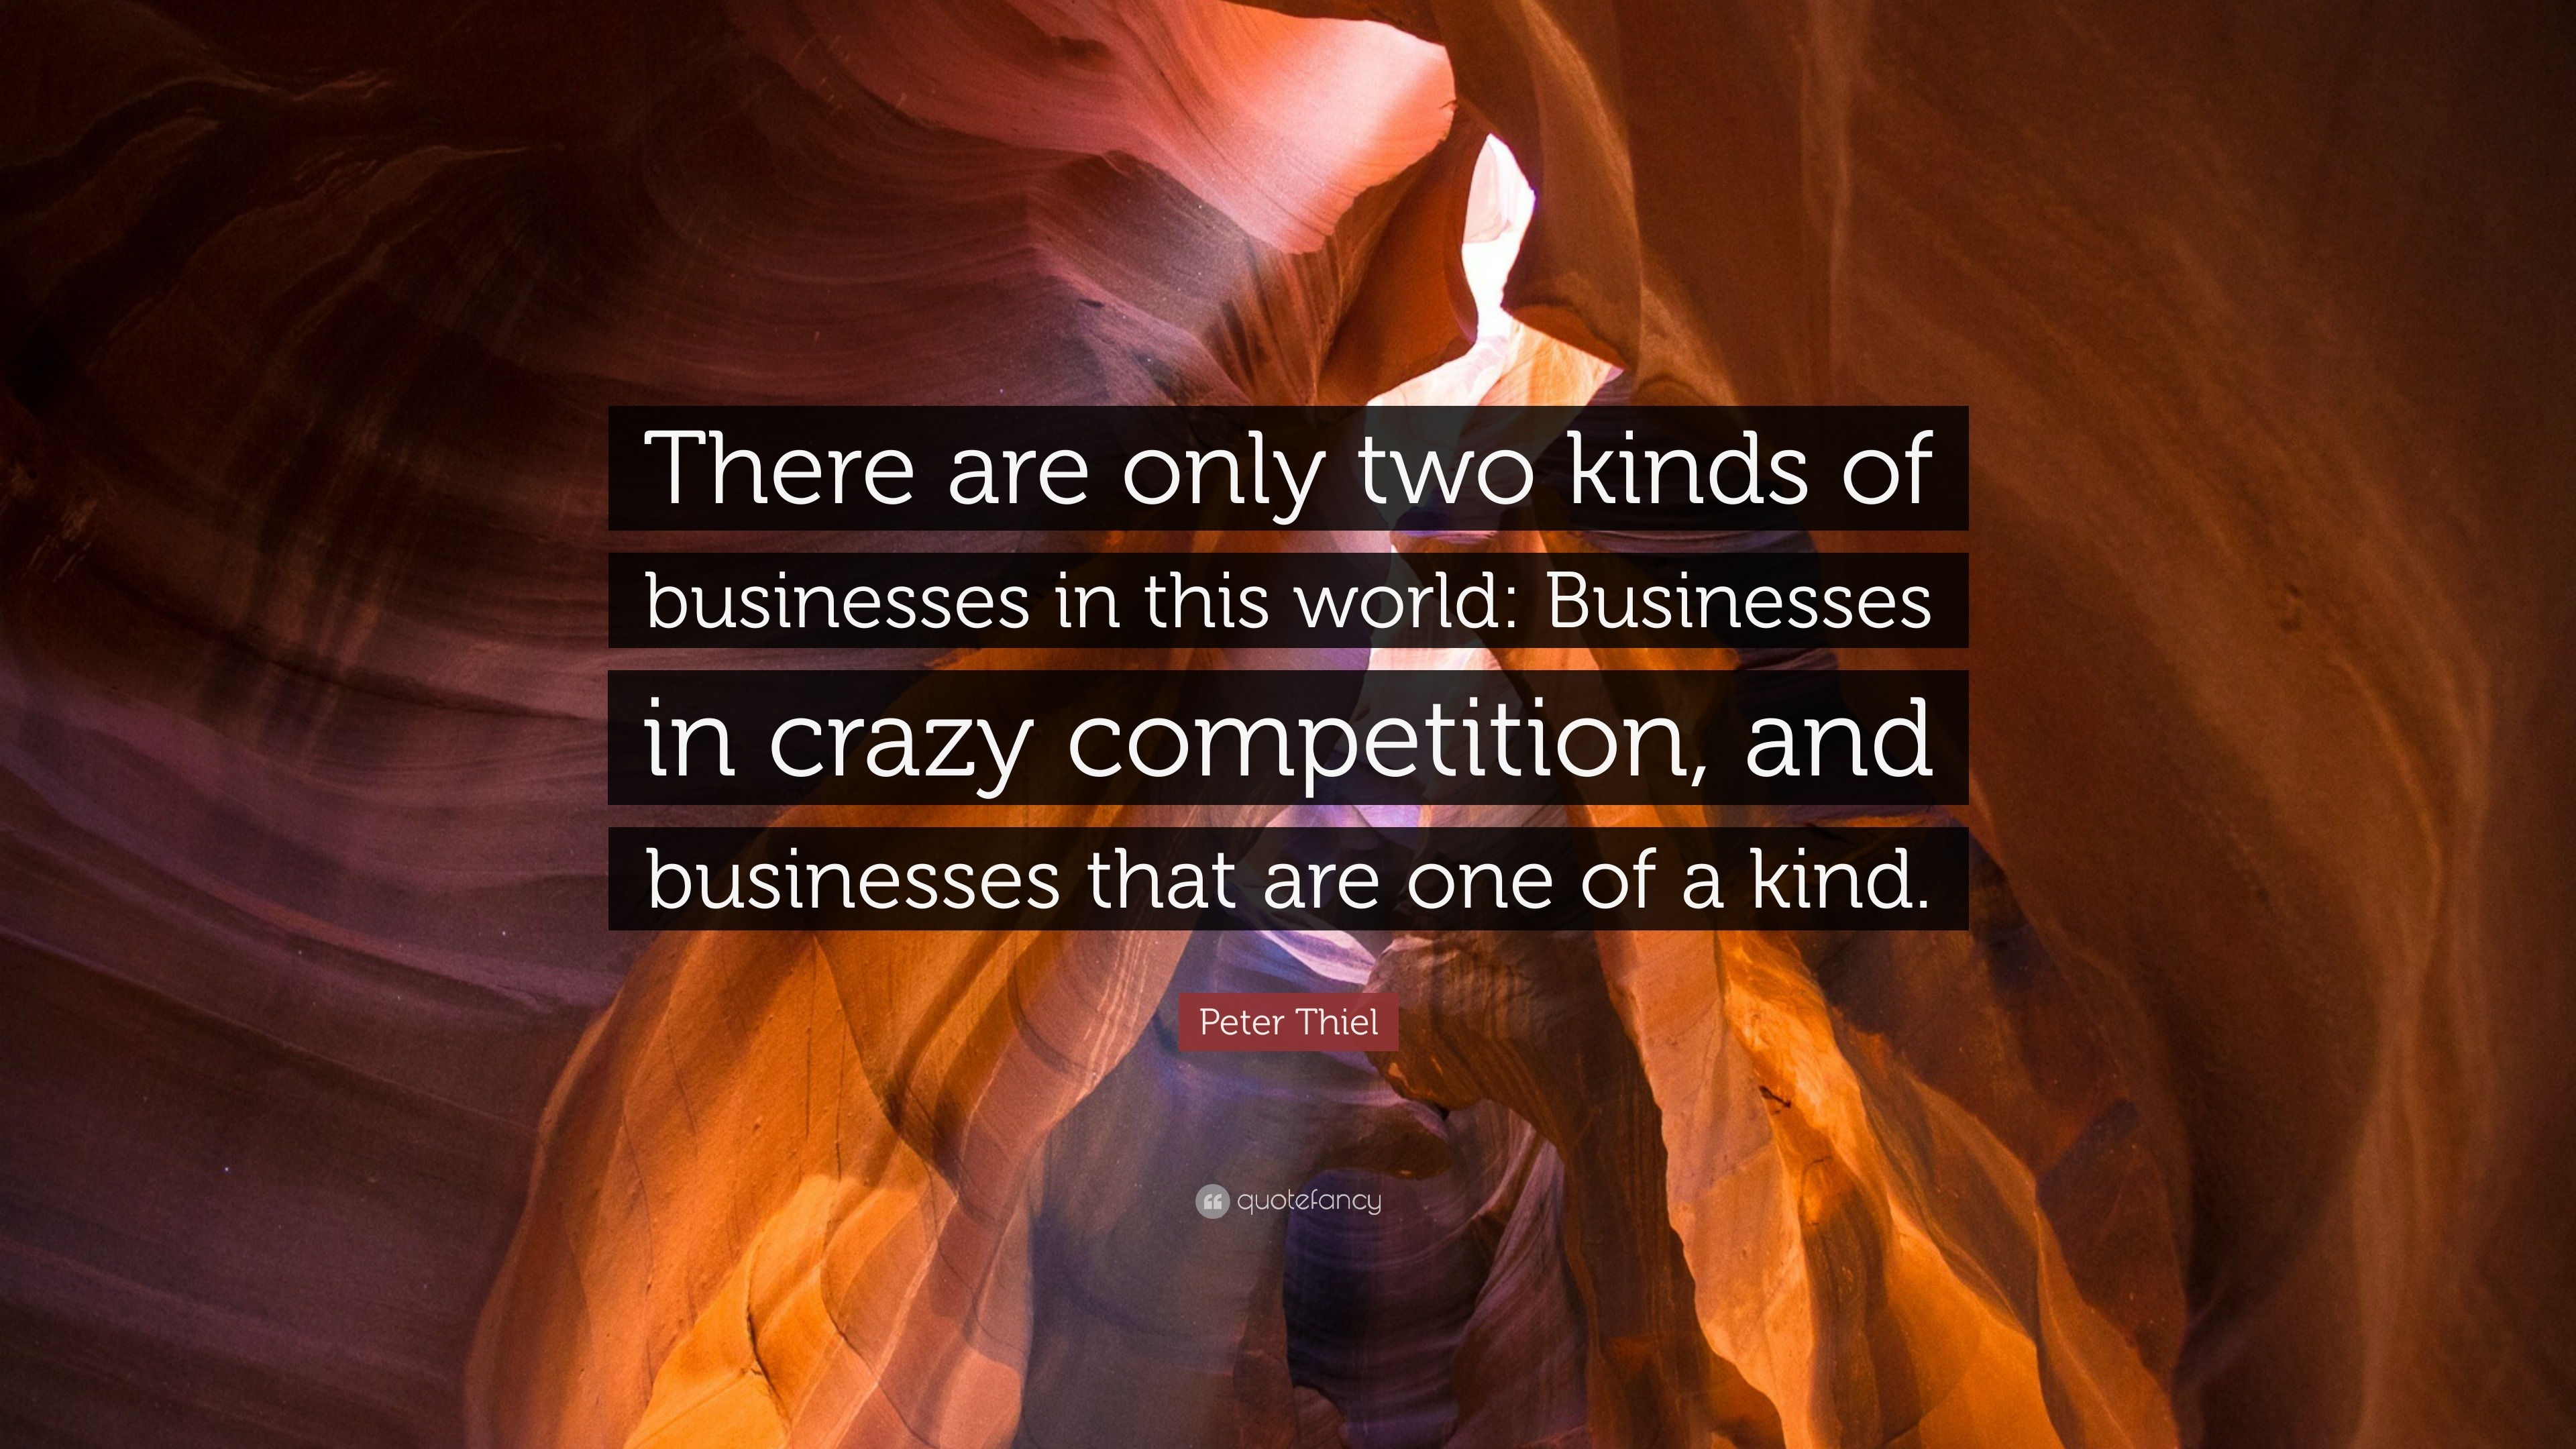 Top 40 Competition Quotes (2023 Update) - Quotefancy